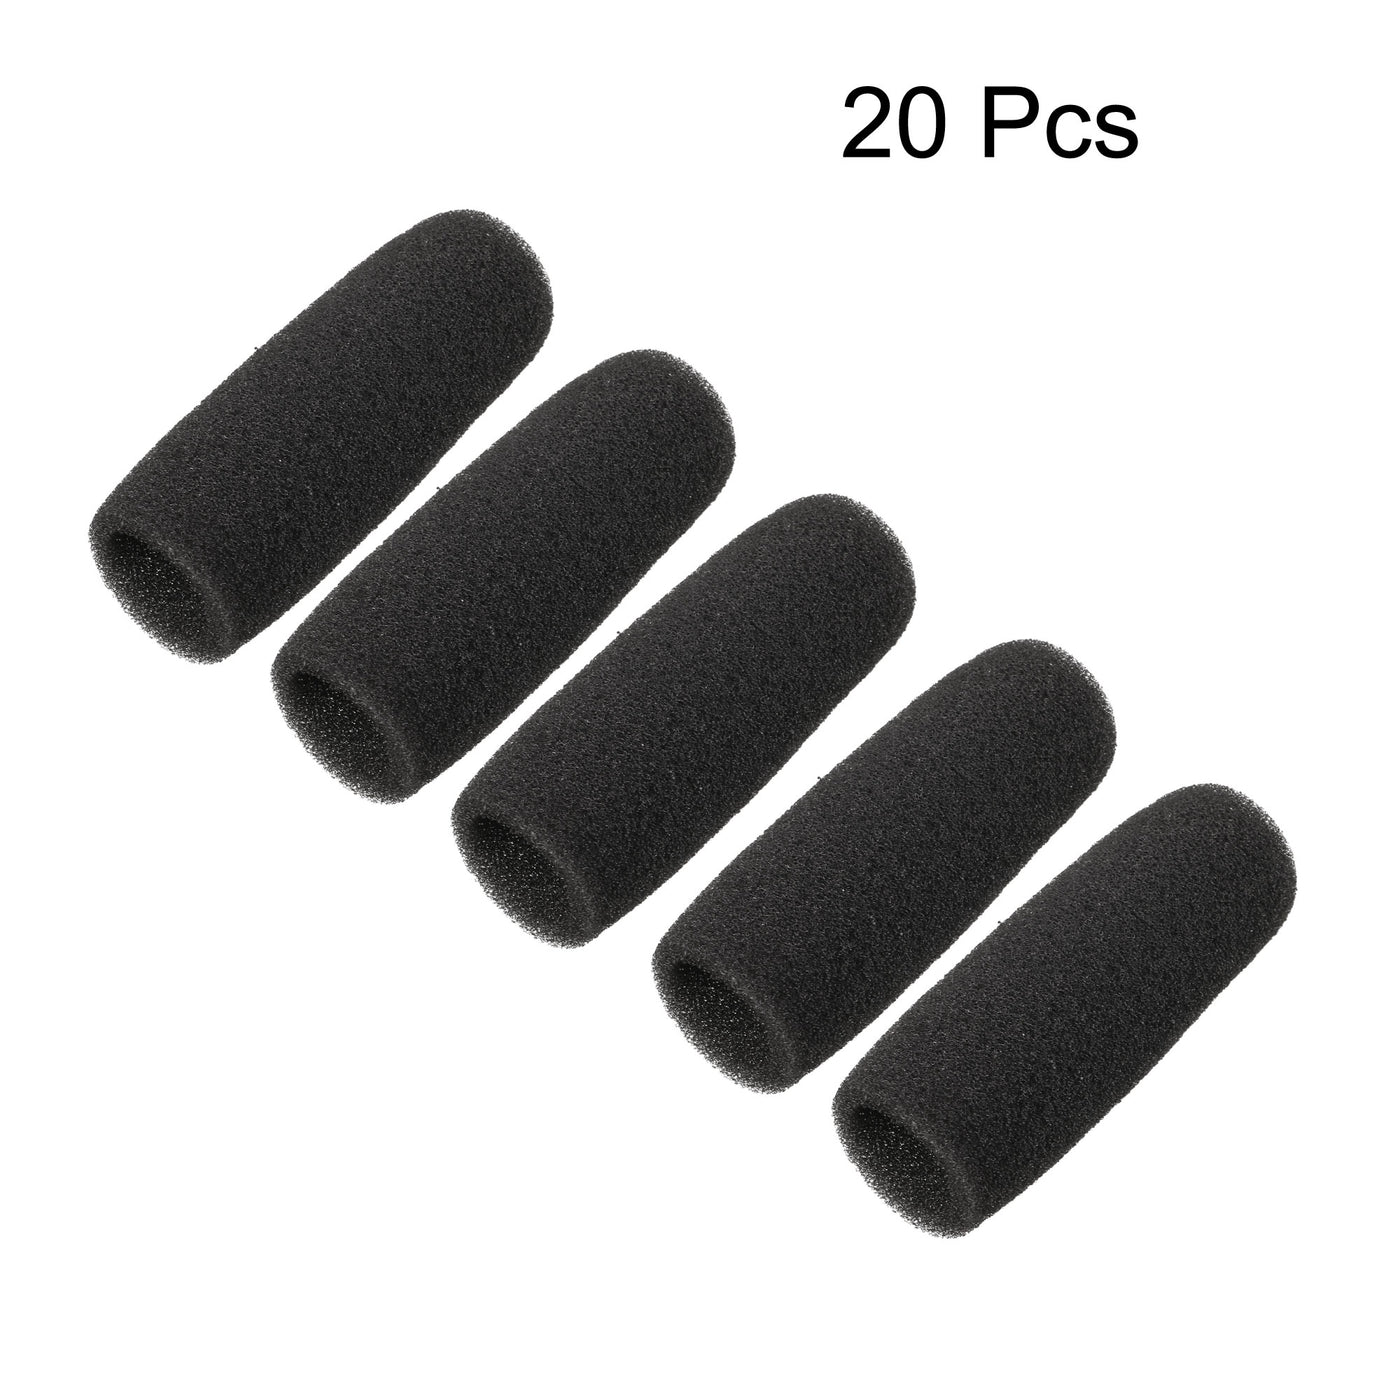 uxcell Uxcell 20PCS Sponge Foam Mic Cover Conference Microphone Windscreen Shield Protection Black 72mm Long